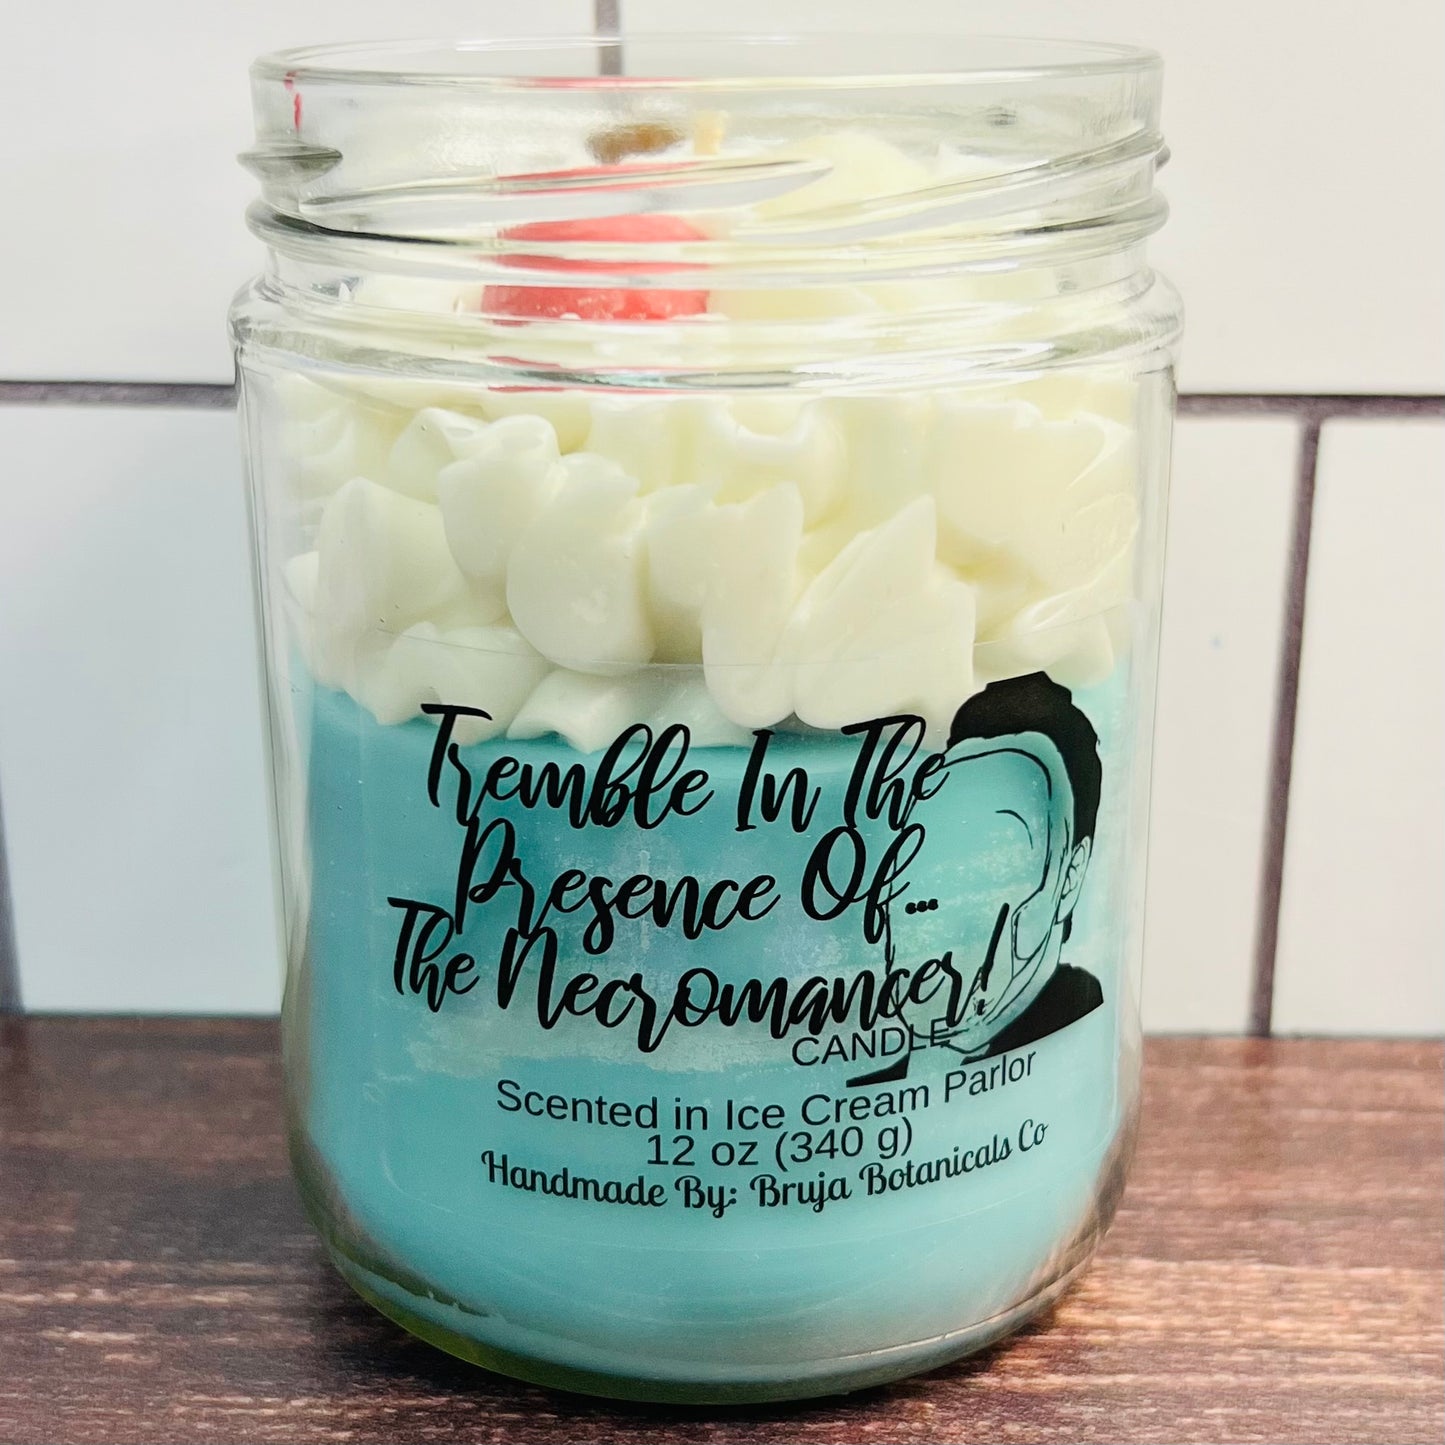 Tremble in the Presence of The Necromancer! Whipped Candle (TVD inspired)